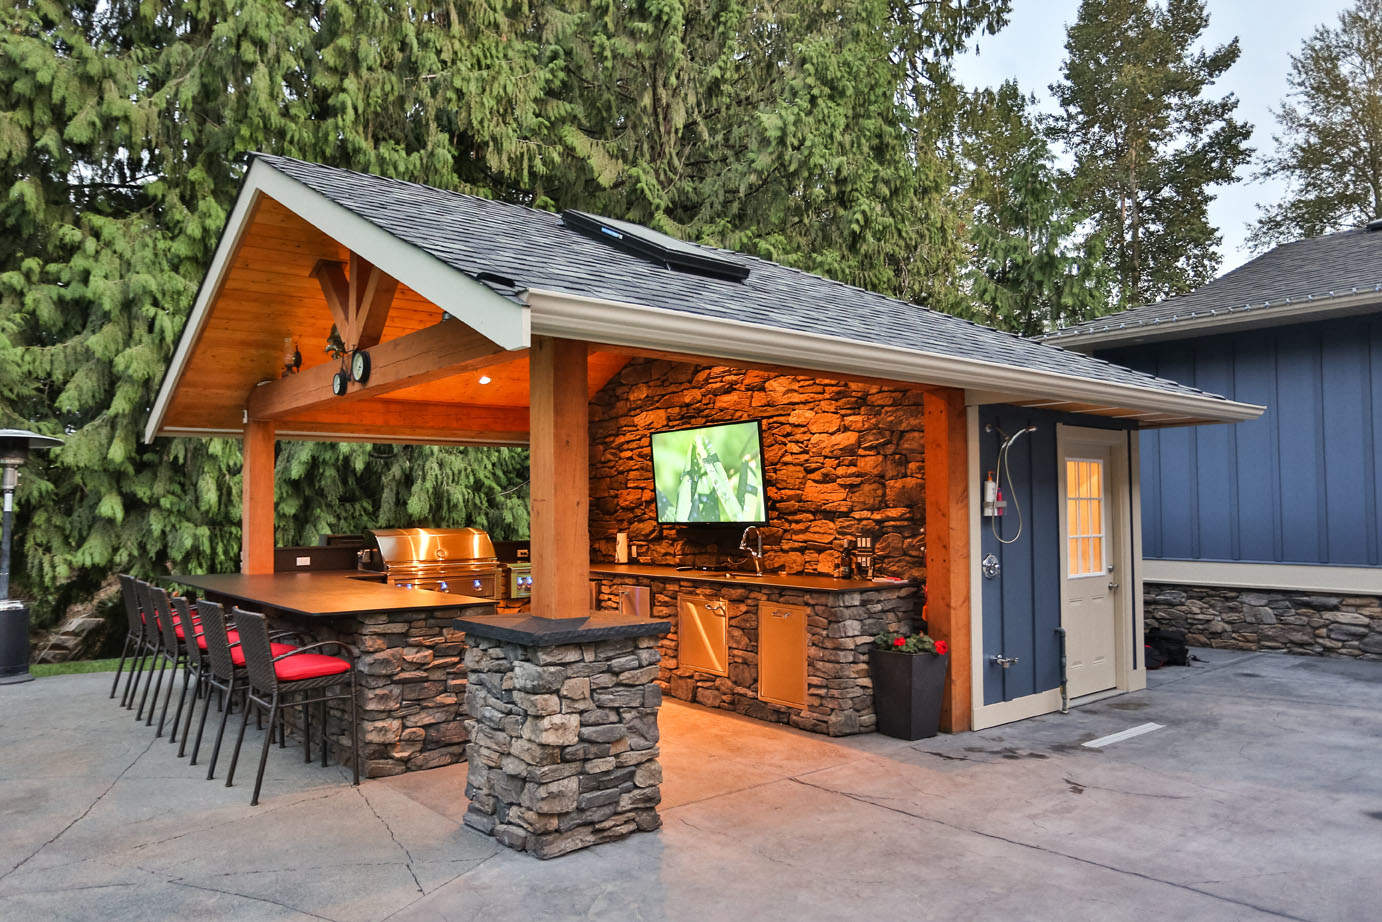 Year round outdoor kitchen with stainless steel appliances